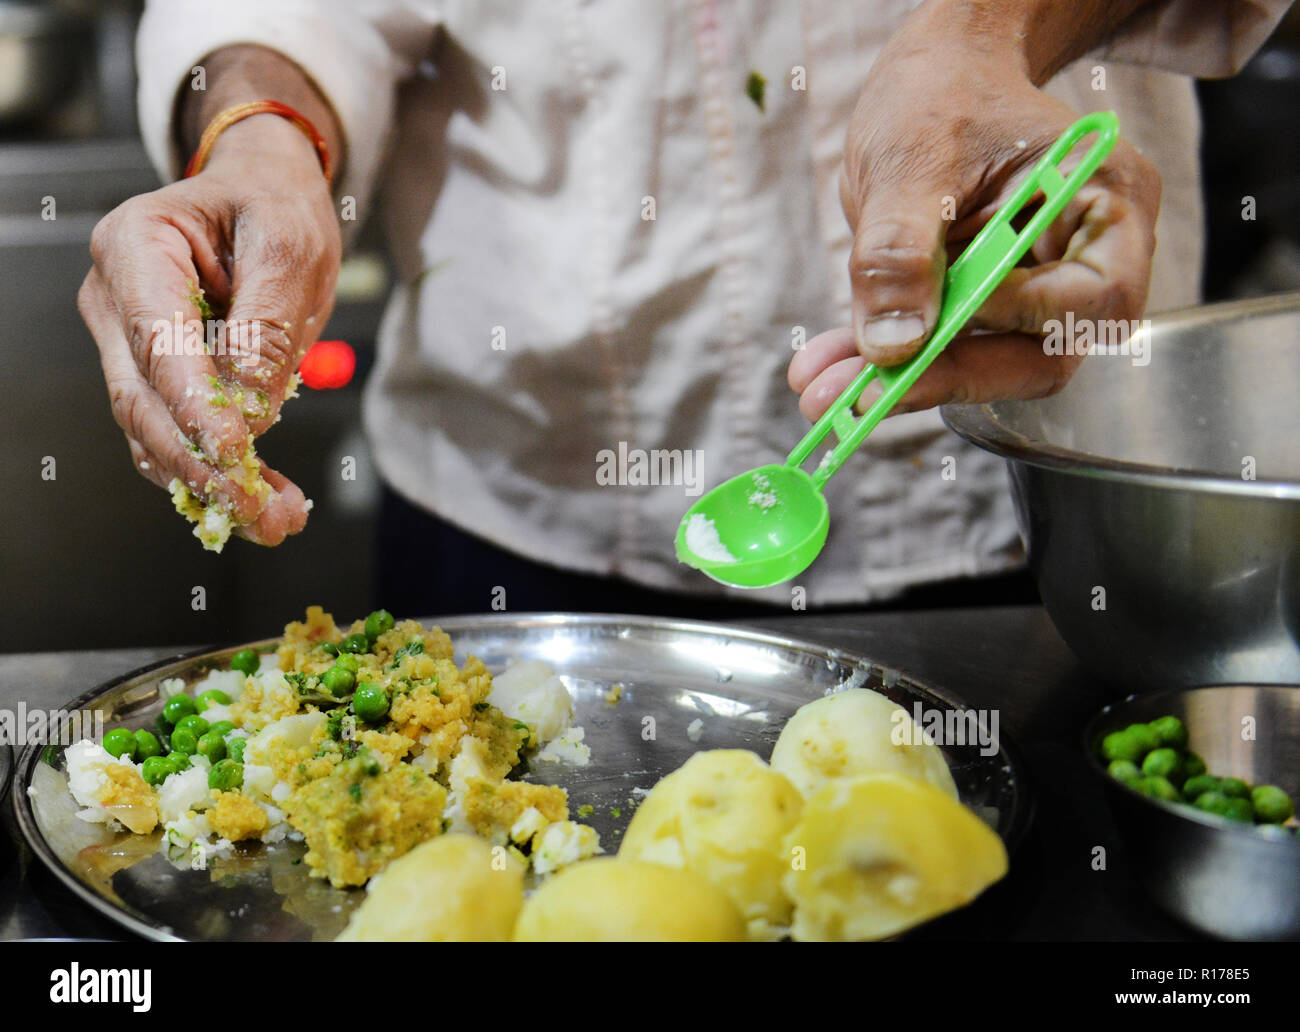 Preparing Millet cutlets in Kaulige restaurant on Brigade road in Bangalore. Stock Photo